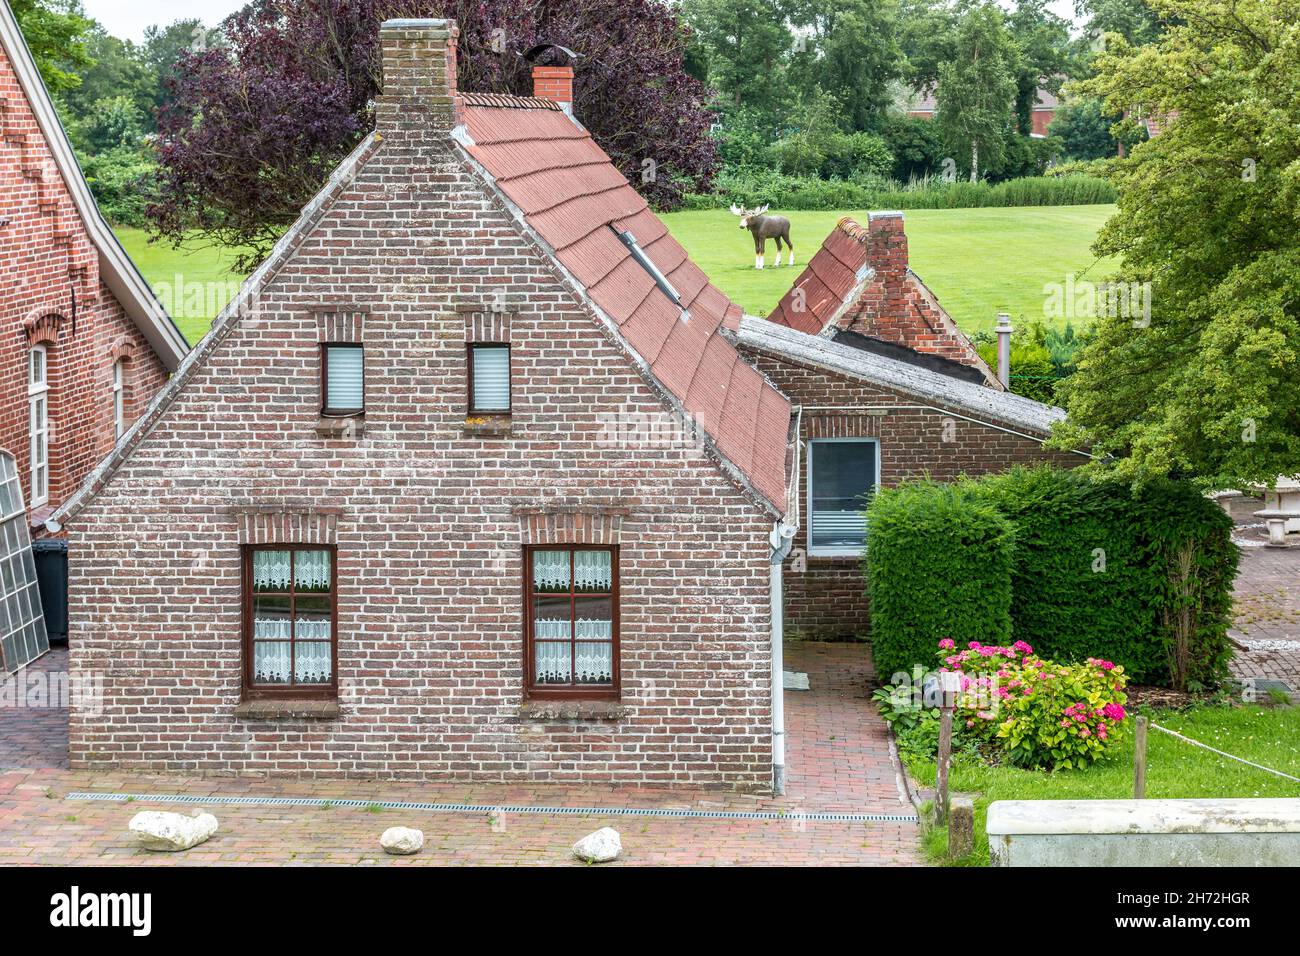 House made of red clincker bricks surrounded by green trees Stock Photo